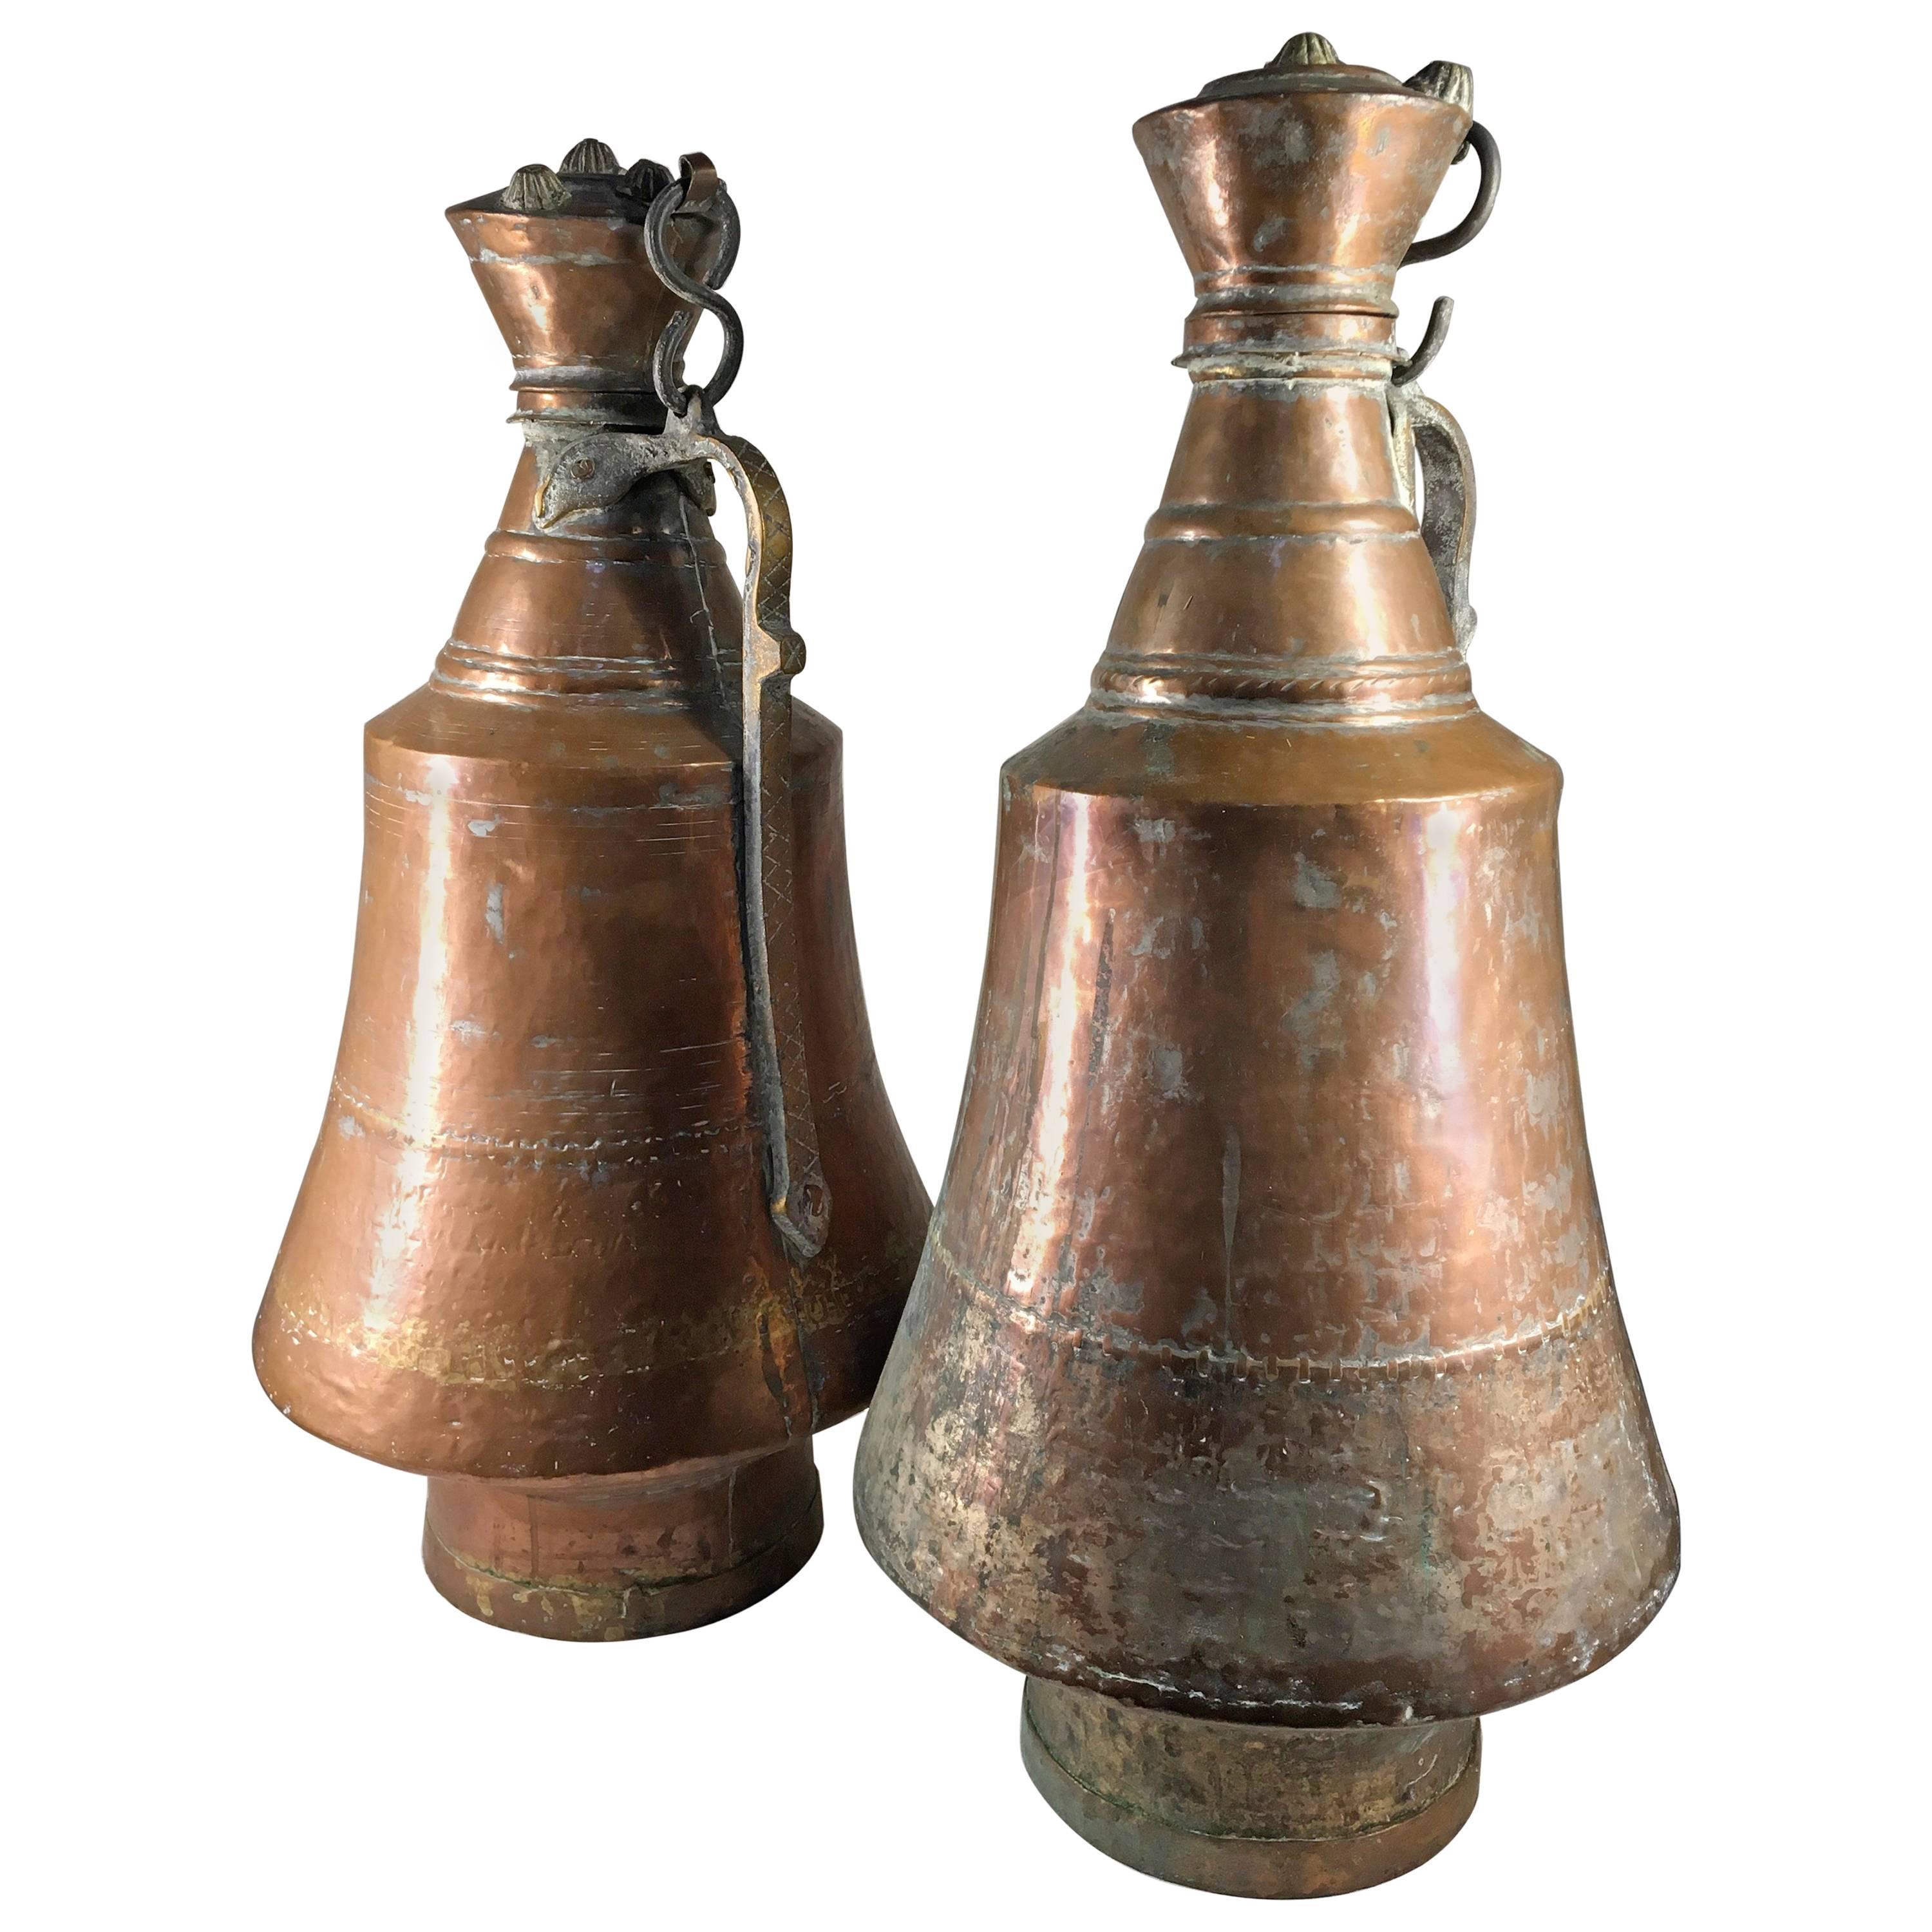 Pair of Large Copper Wine Jars with Lids